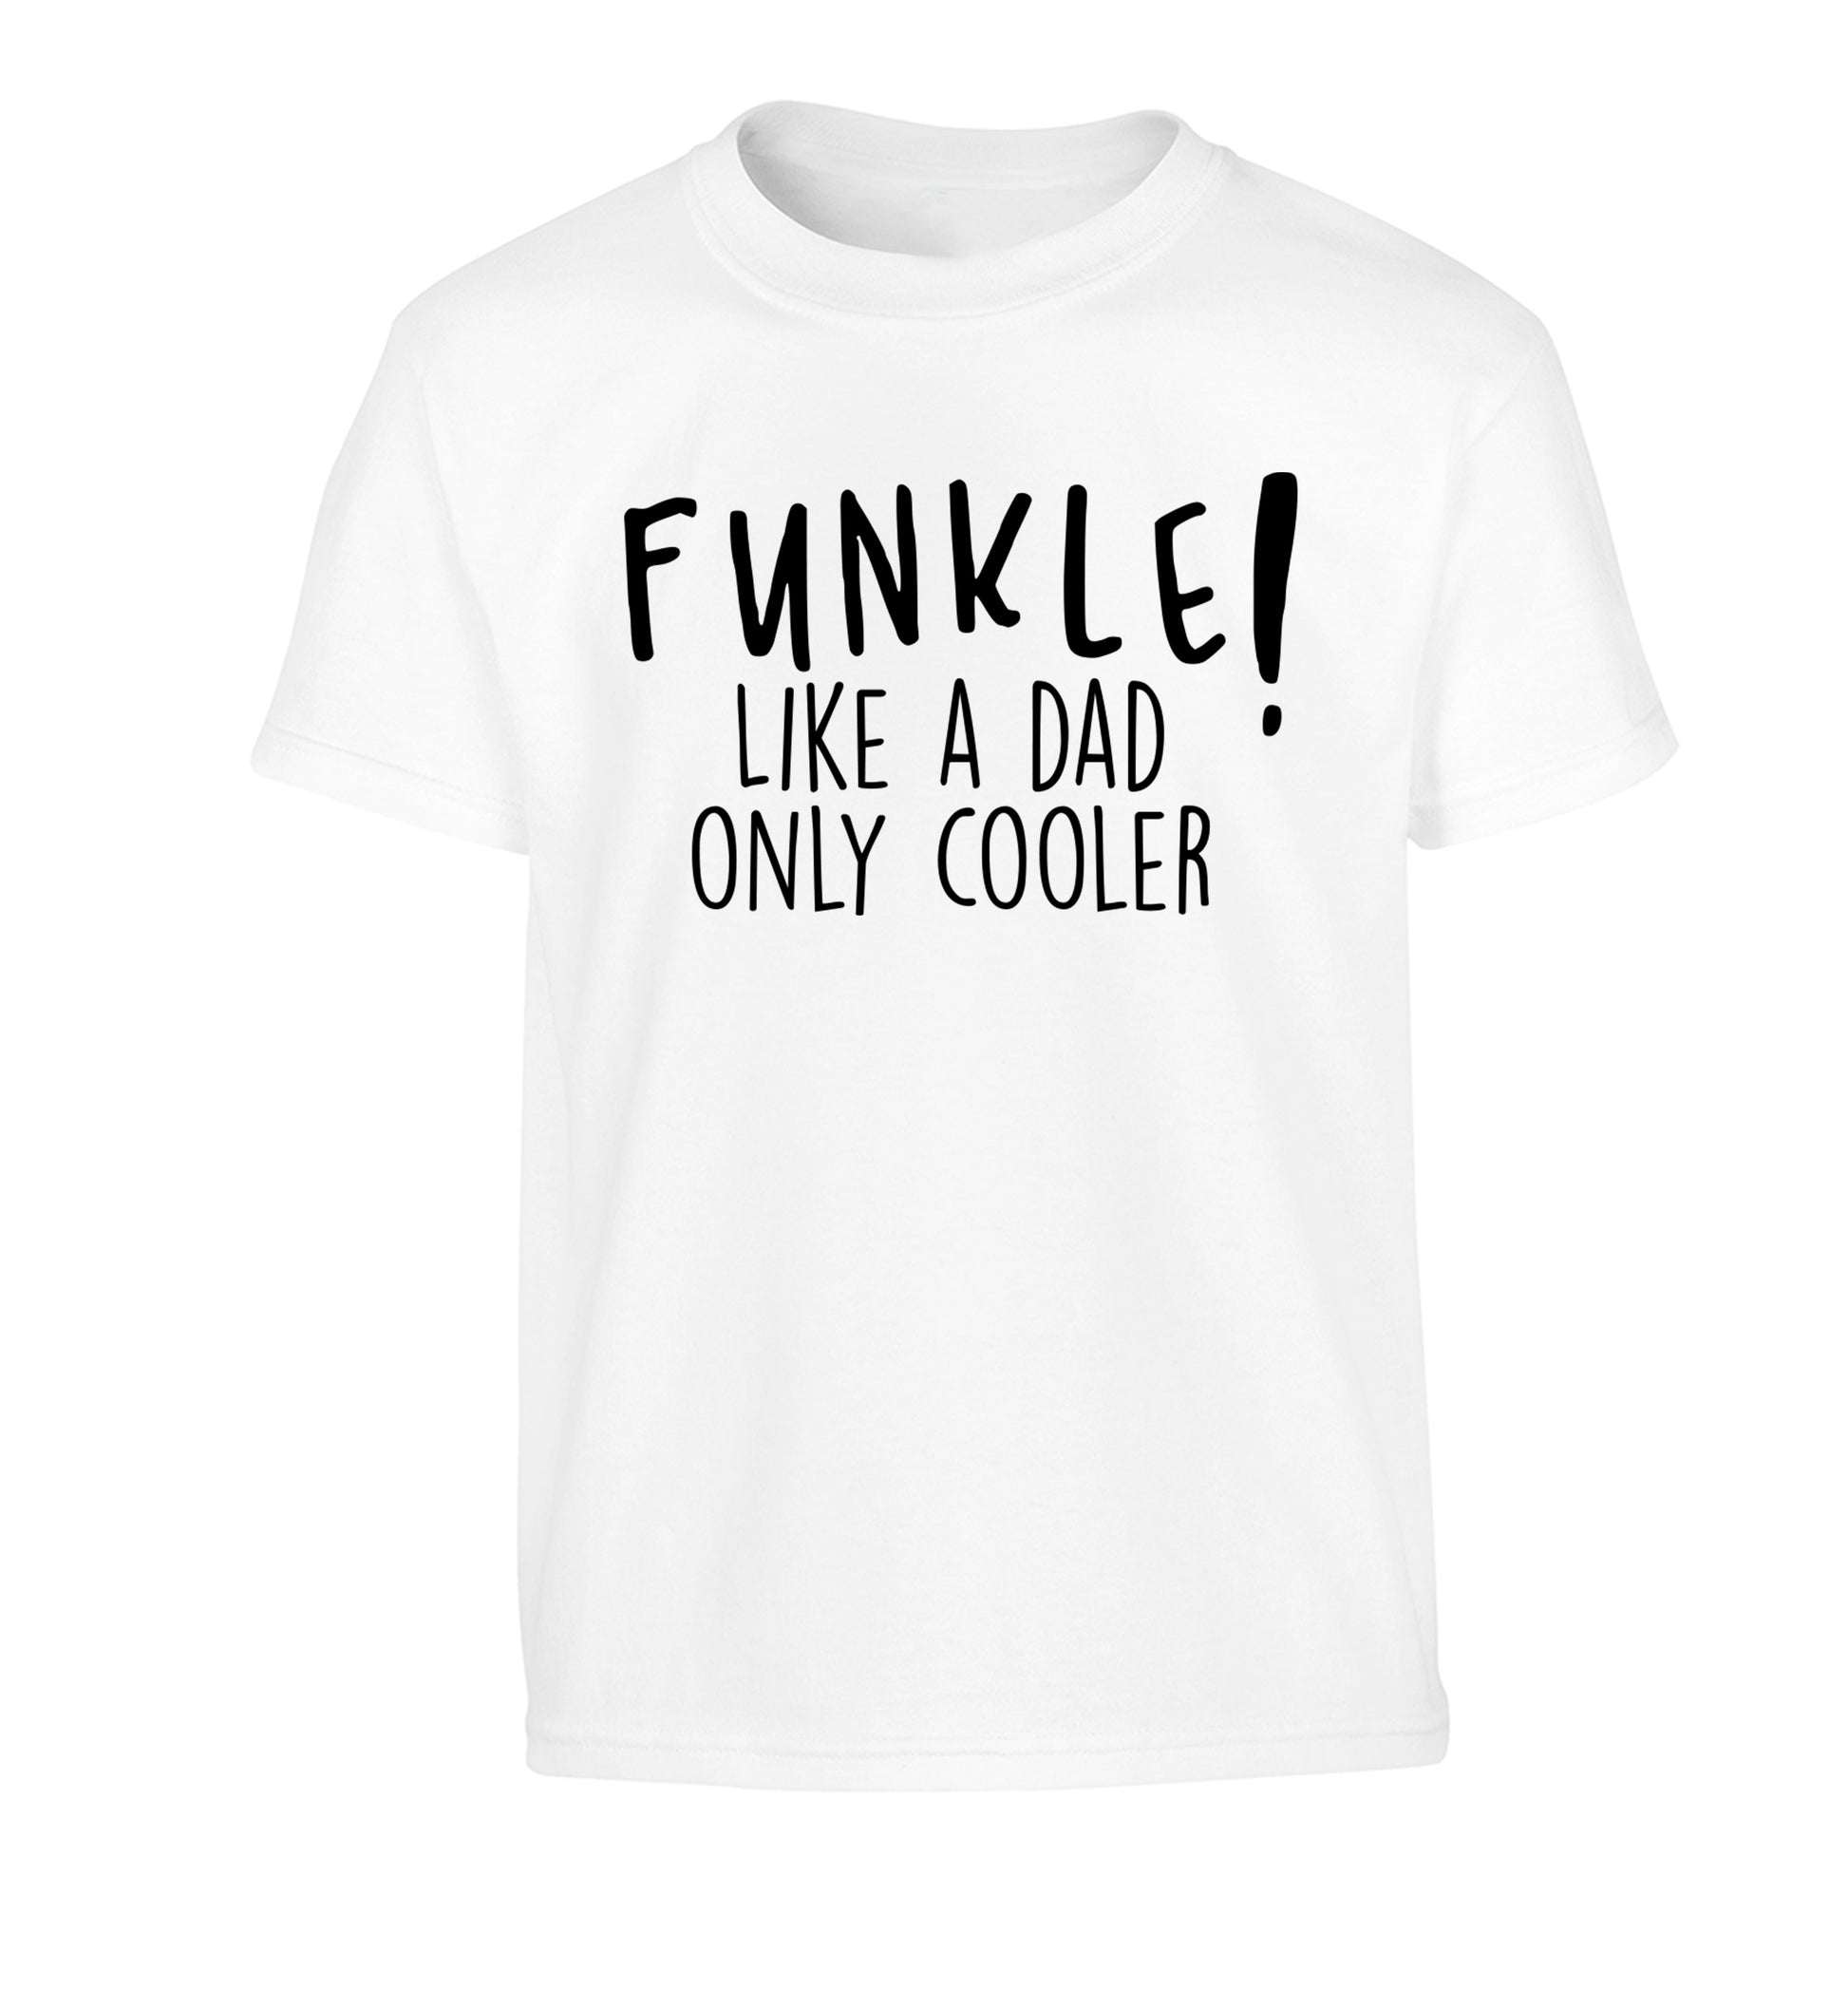 Funkle Like a Dad Only Cooler Children's white Tshirt 12-13 Years